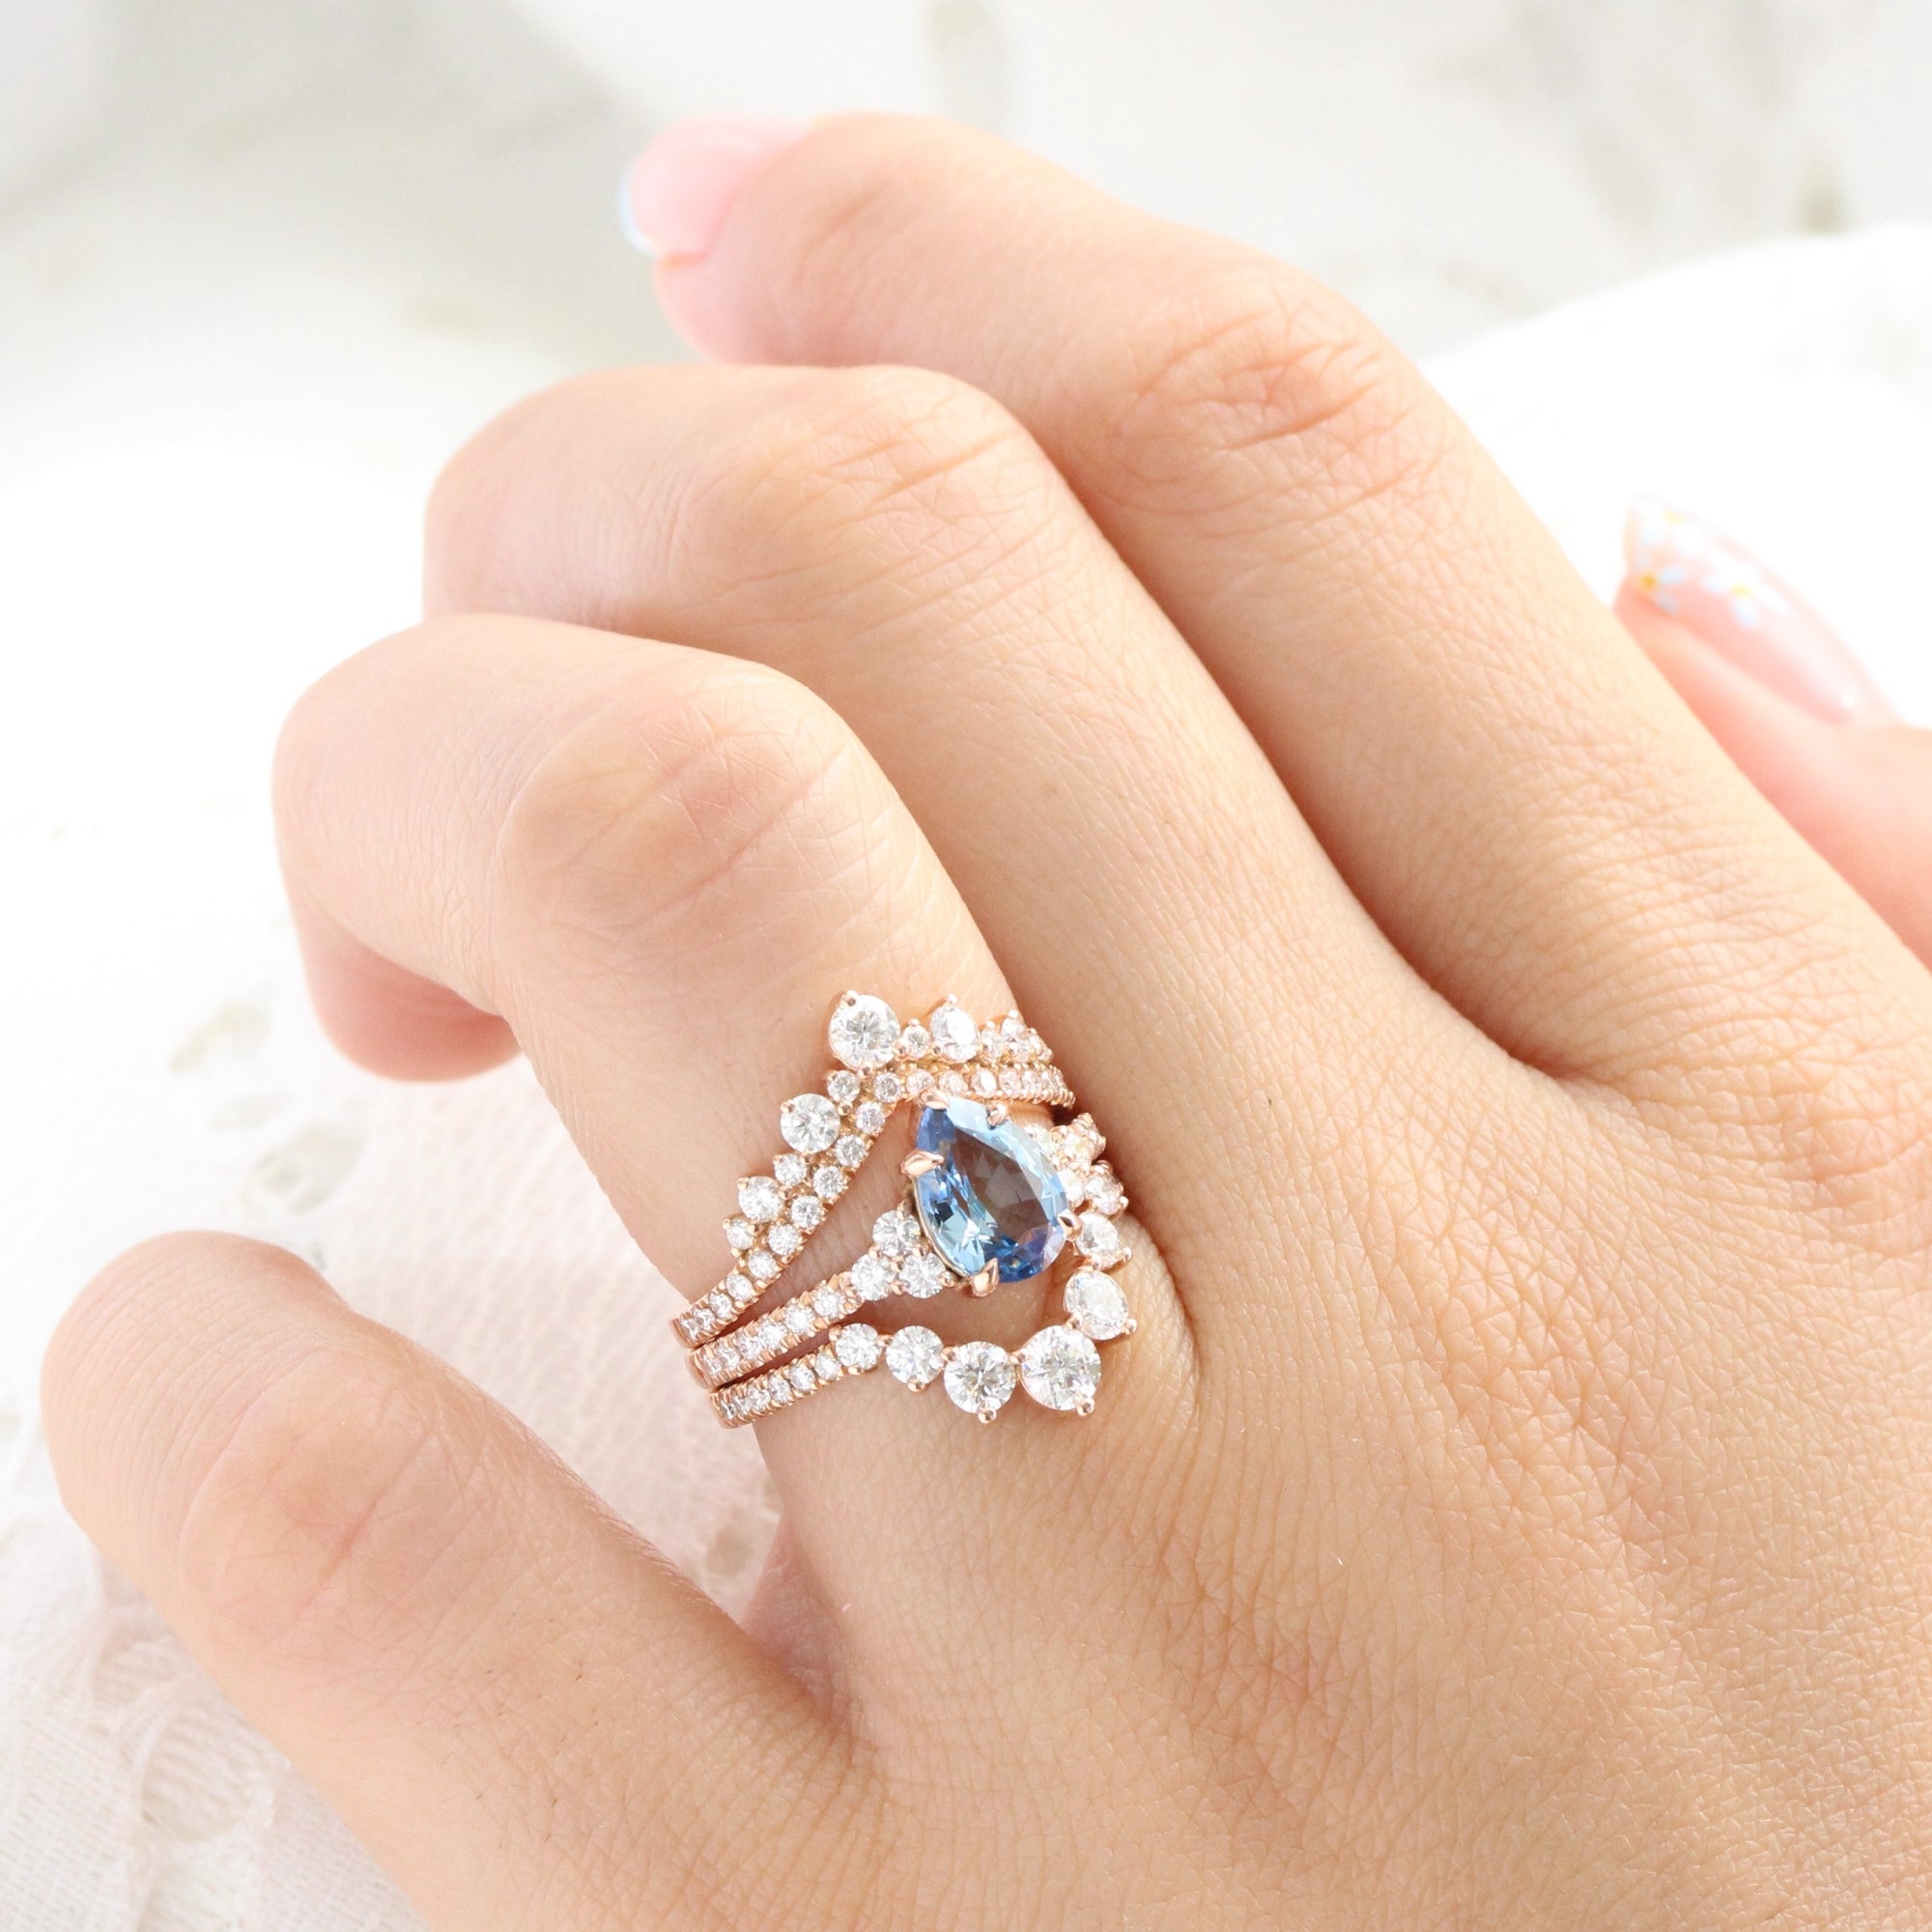 Pear teal blue sapphire ring rose gold 3 stone diamond ring la more design jewelry